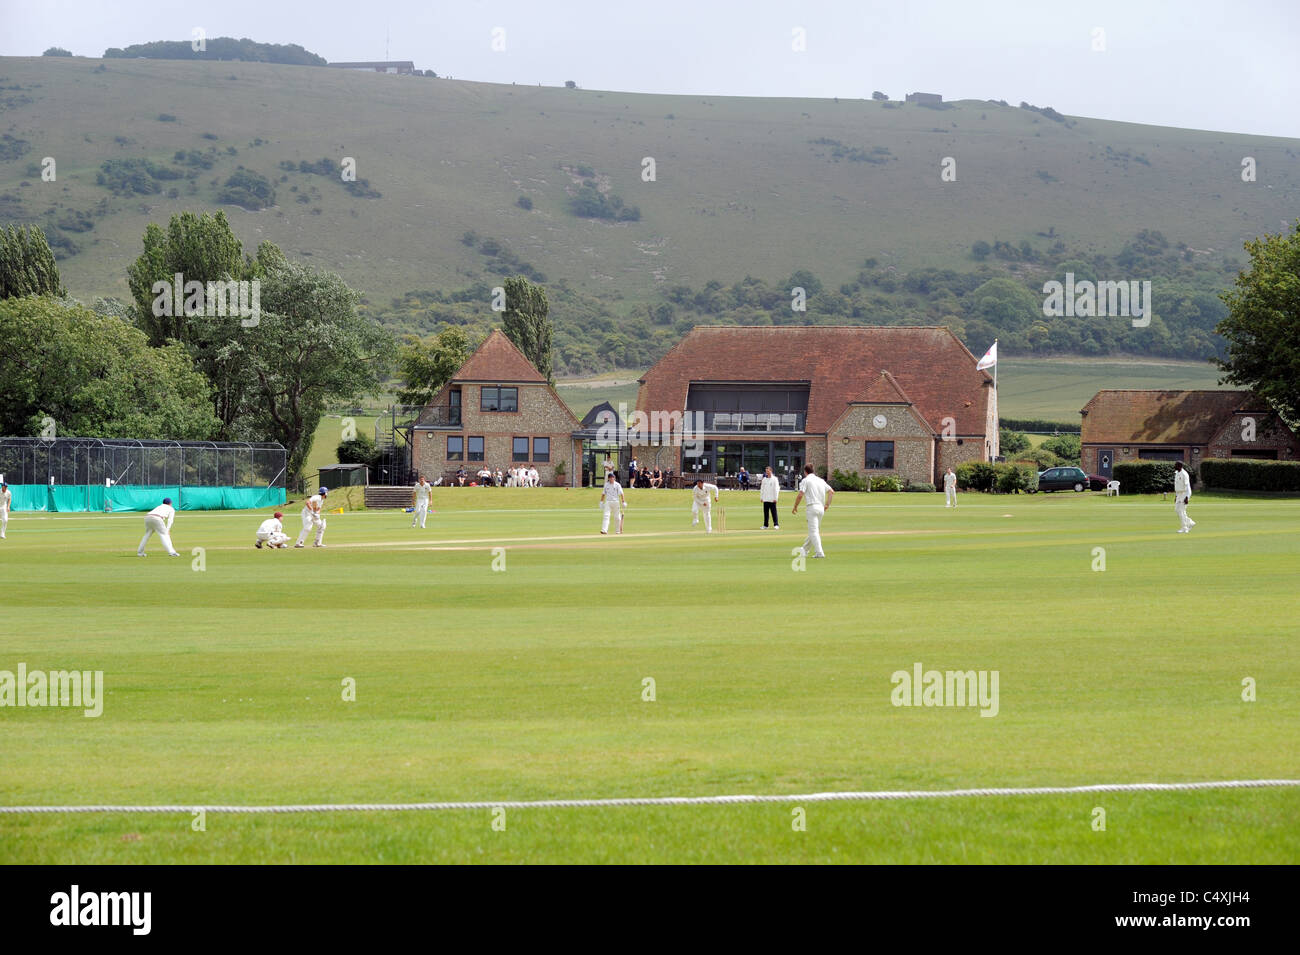 Preston Nomads play hosts to Horsham cricket team at their picturesque ground in Fulking Sussex which is overlooked by the Downs Stock Photo